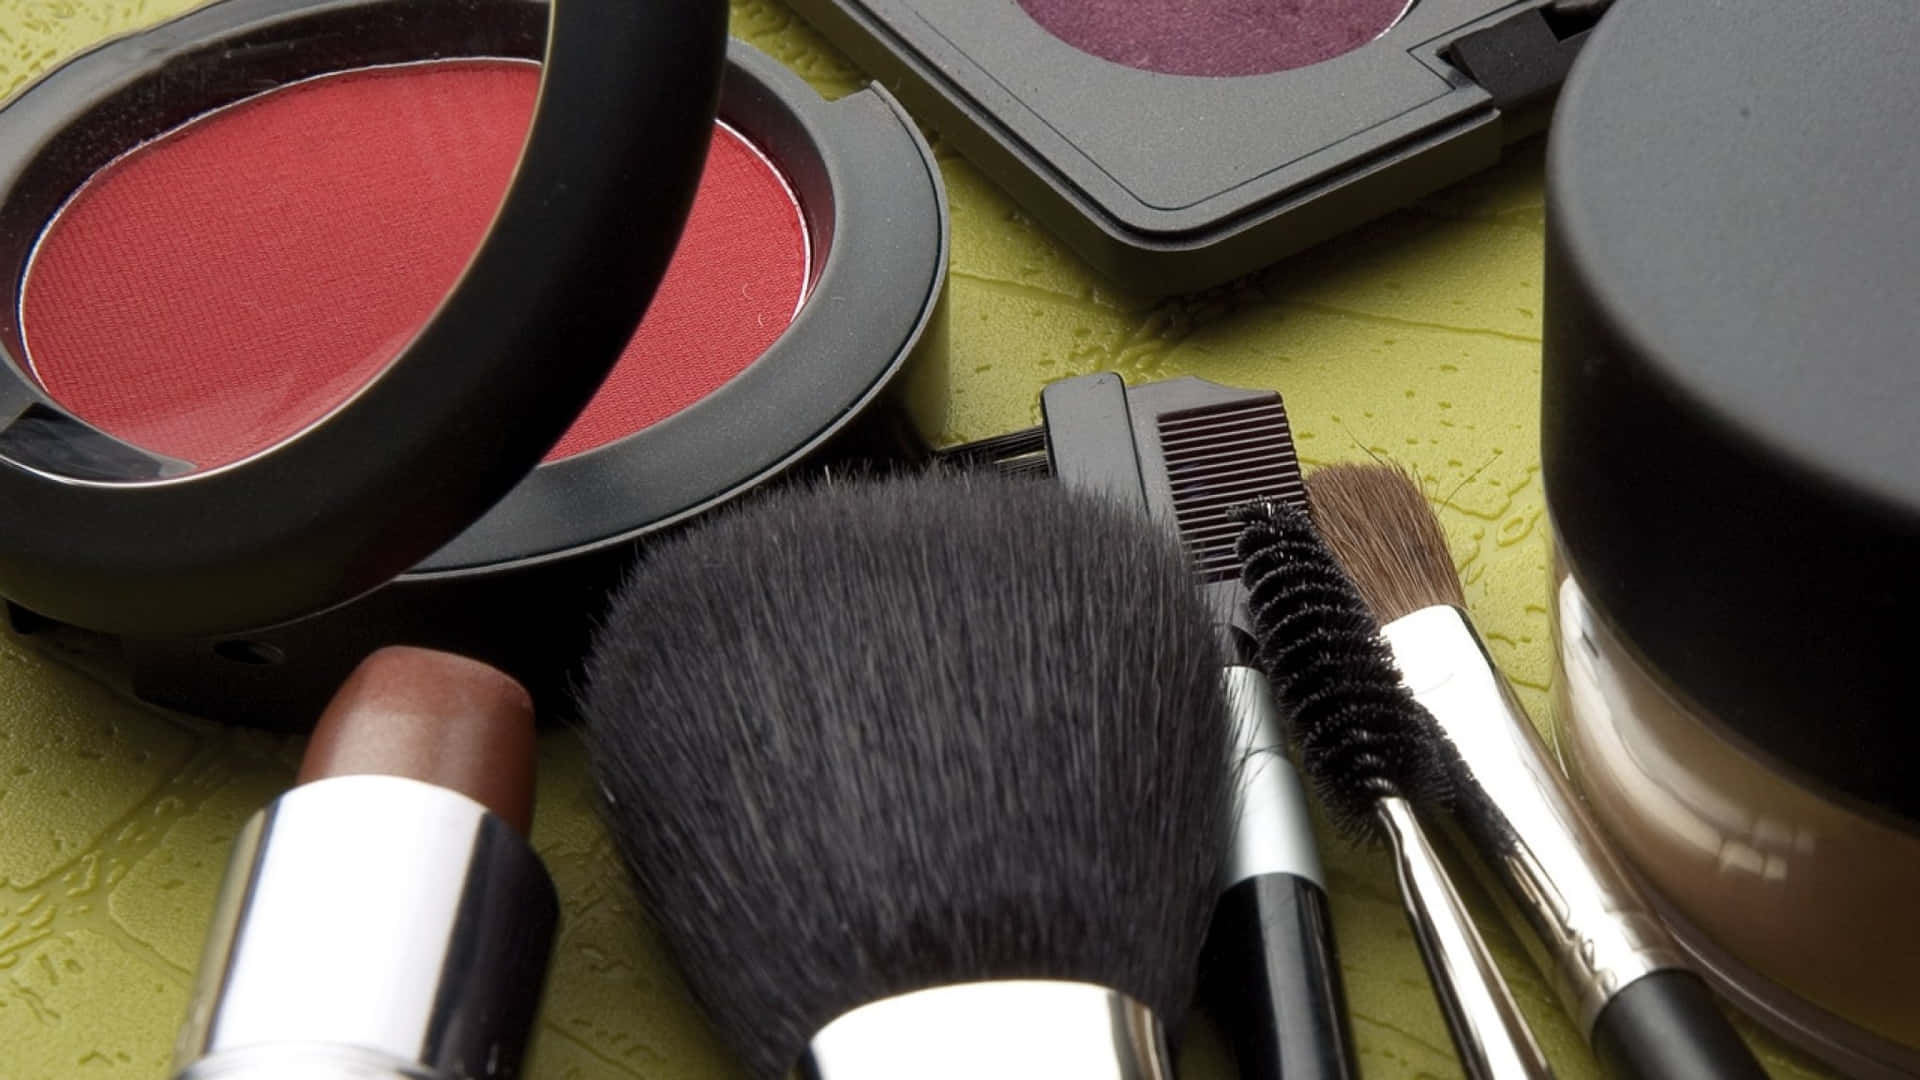 Cosmetics And Makeup Brushes On A Green Surface